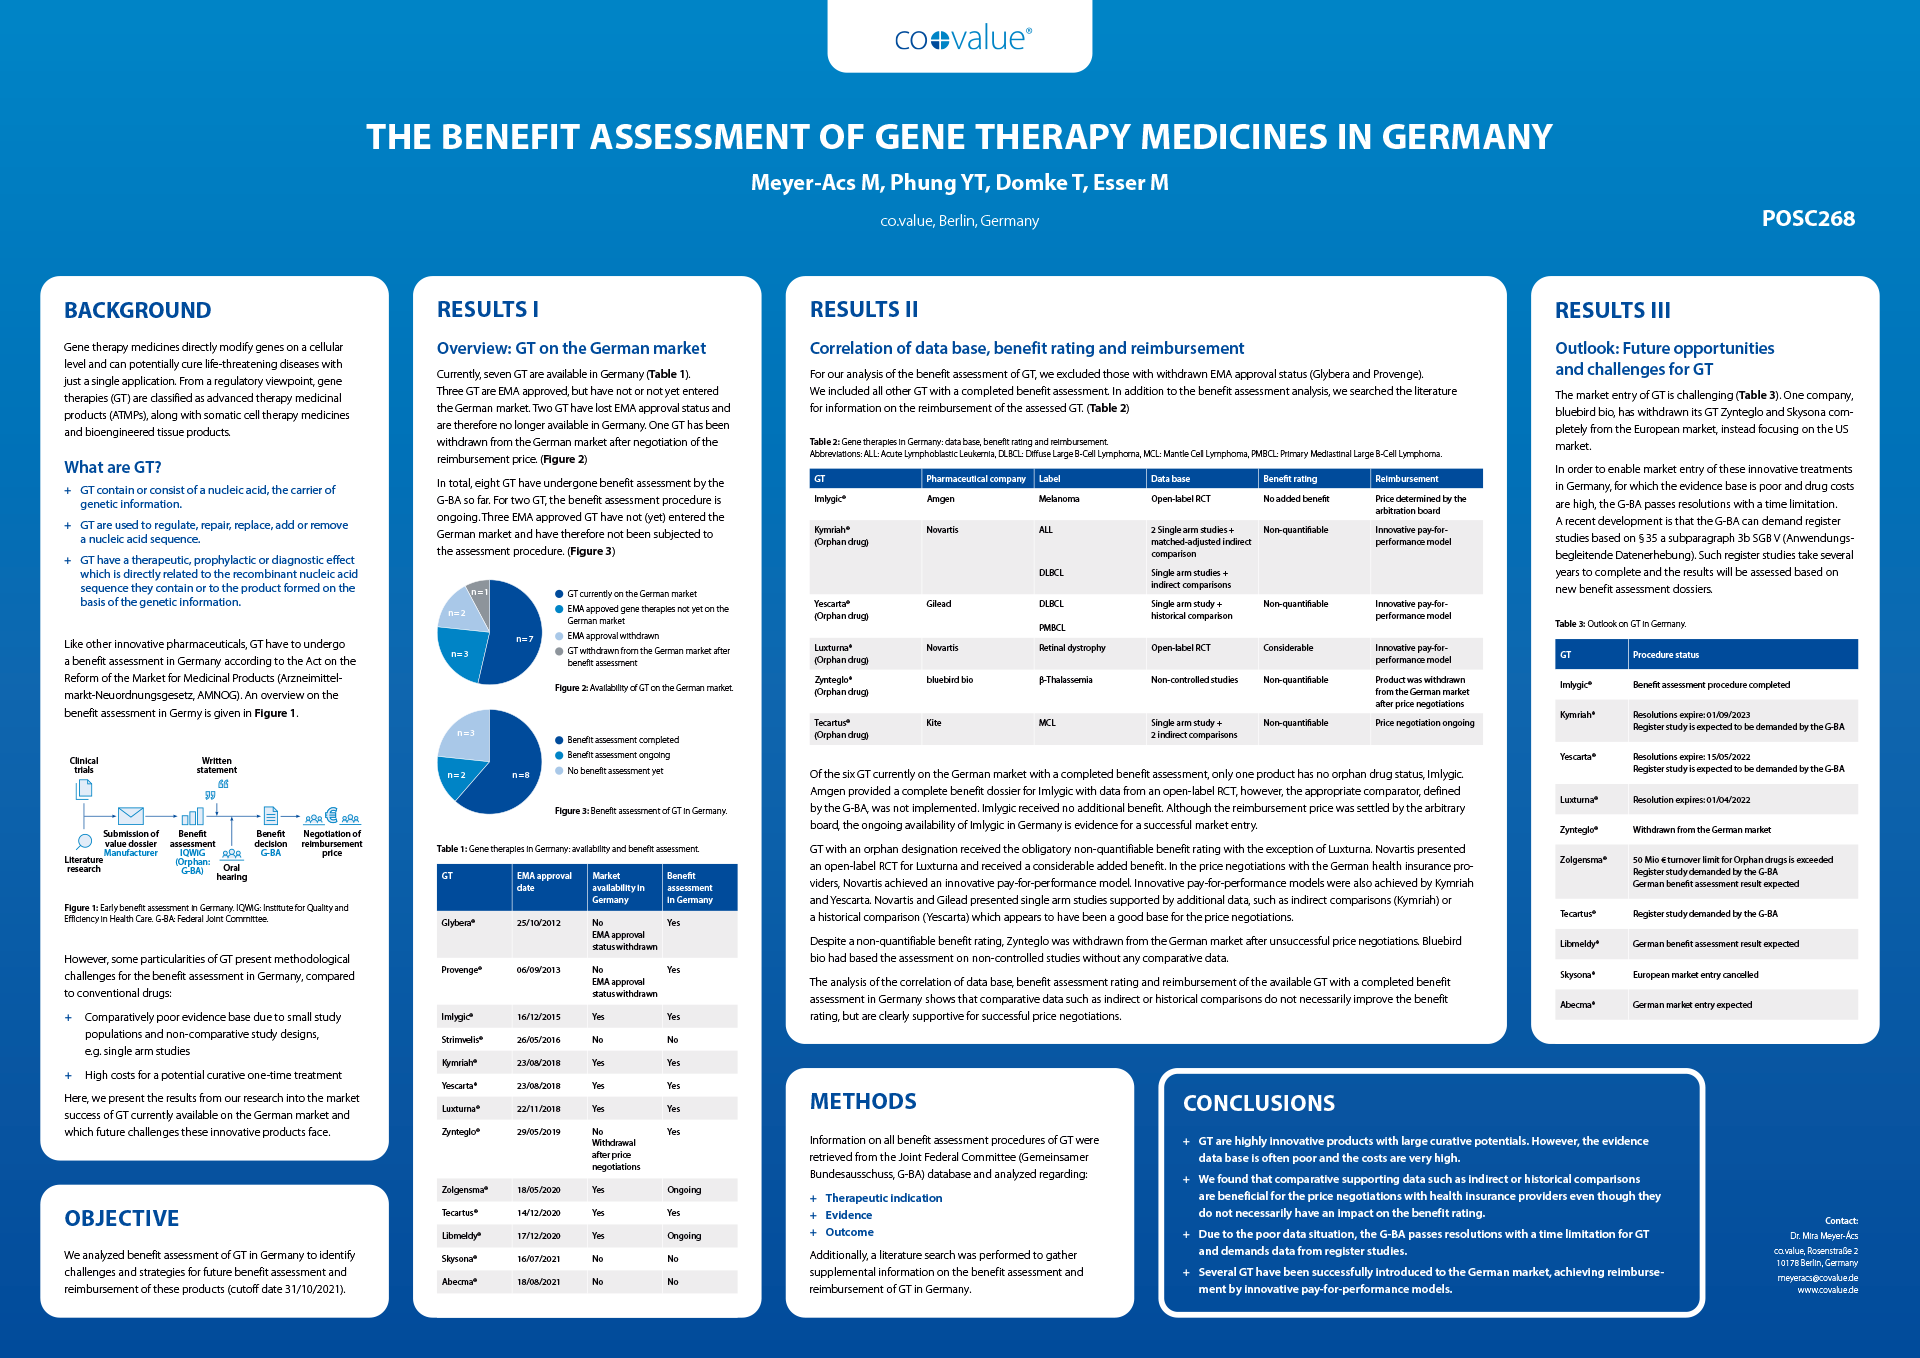 The Benefit Assessment of Gene Therapy Medicines in Germany